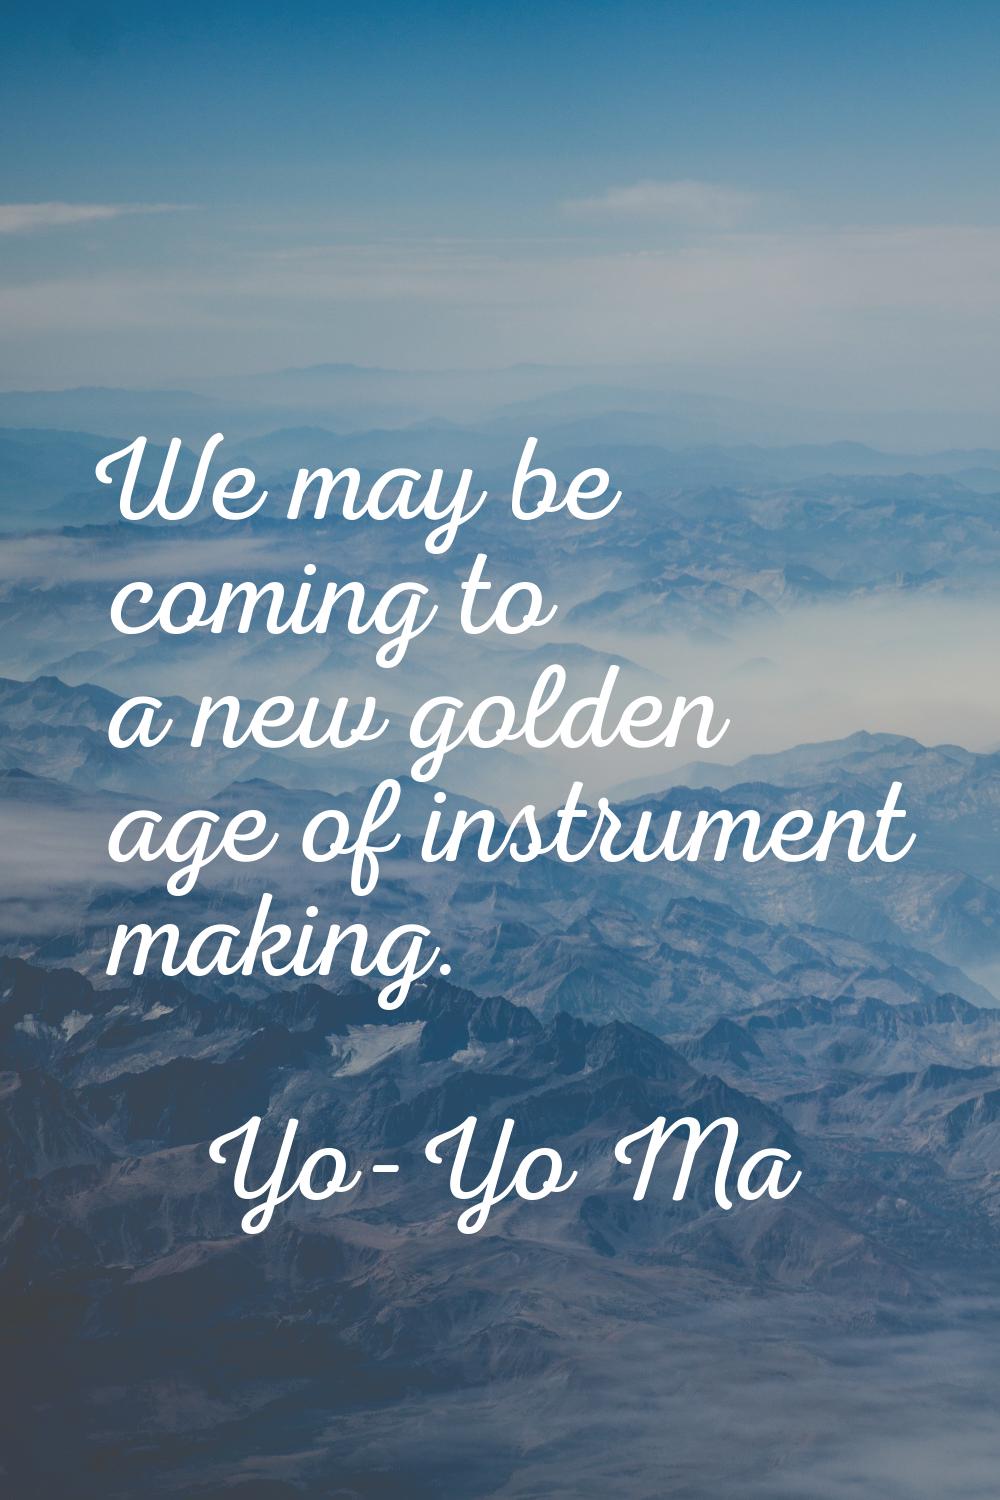 We may be coming to a new golden age of instrument making.